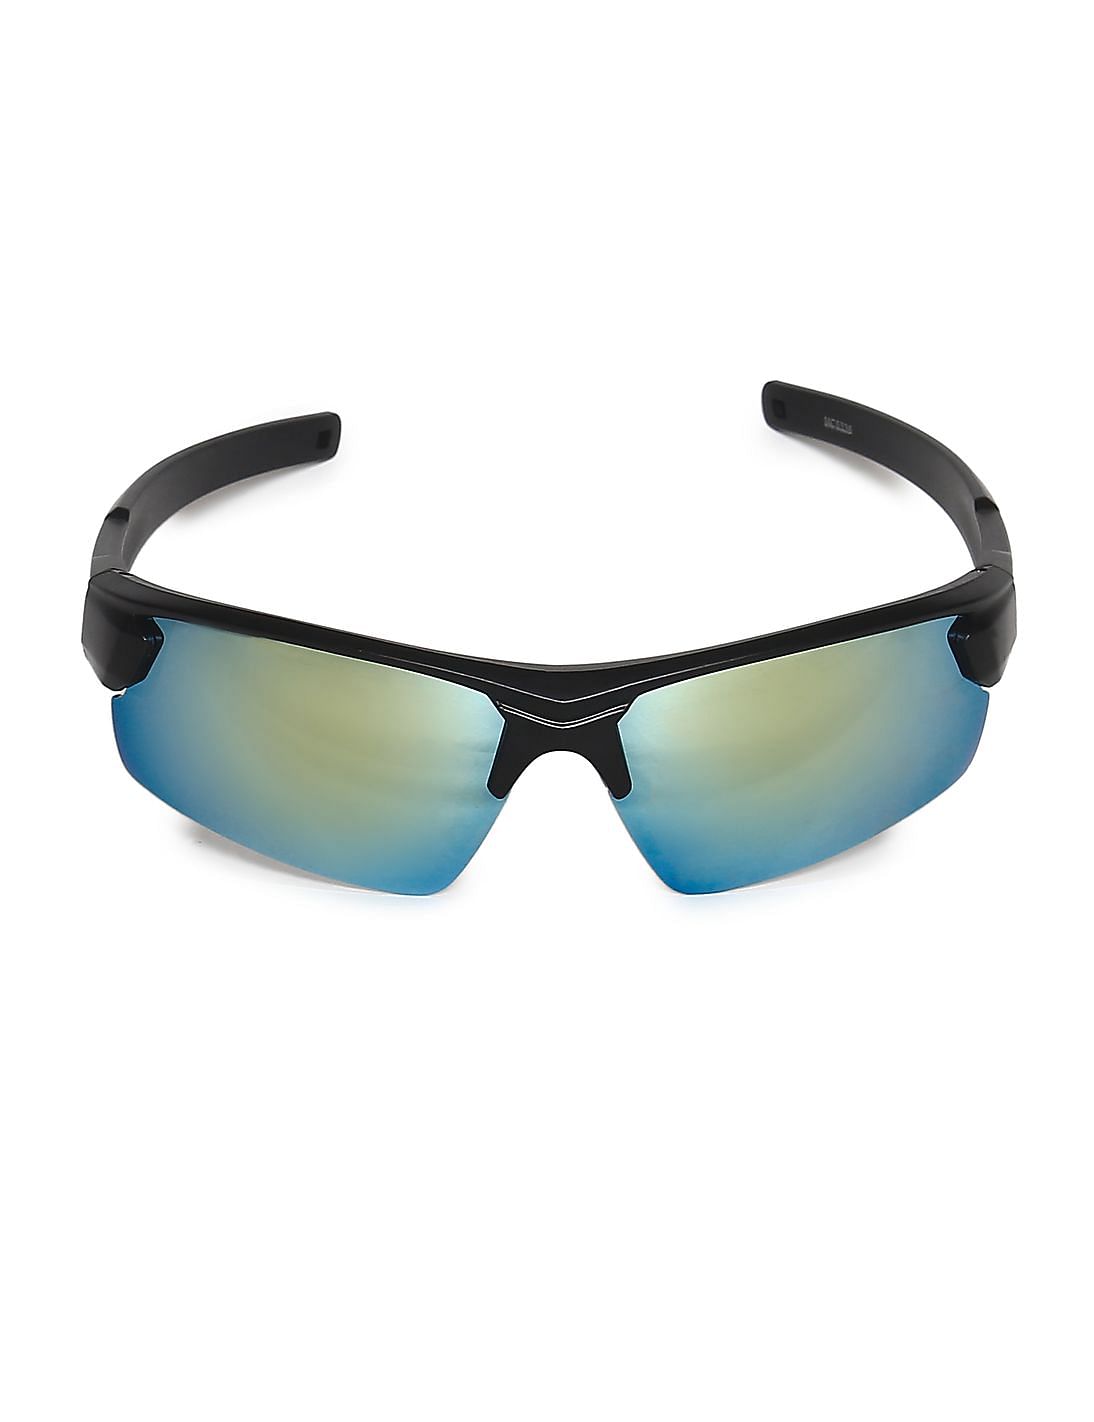 Upto 79% Off on Colt Sunglasses Starts from Rs. 120